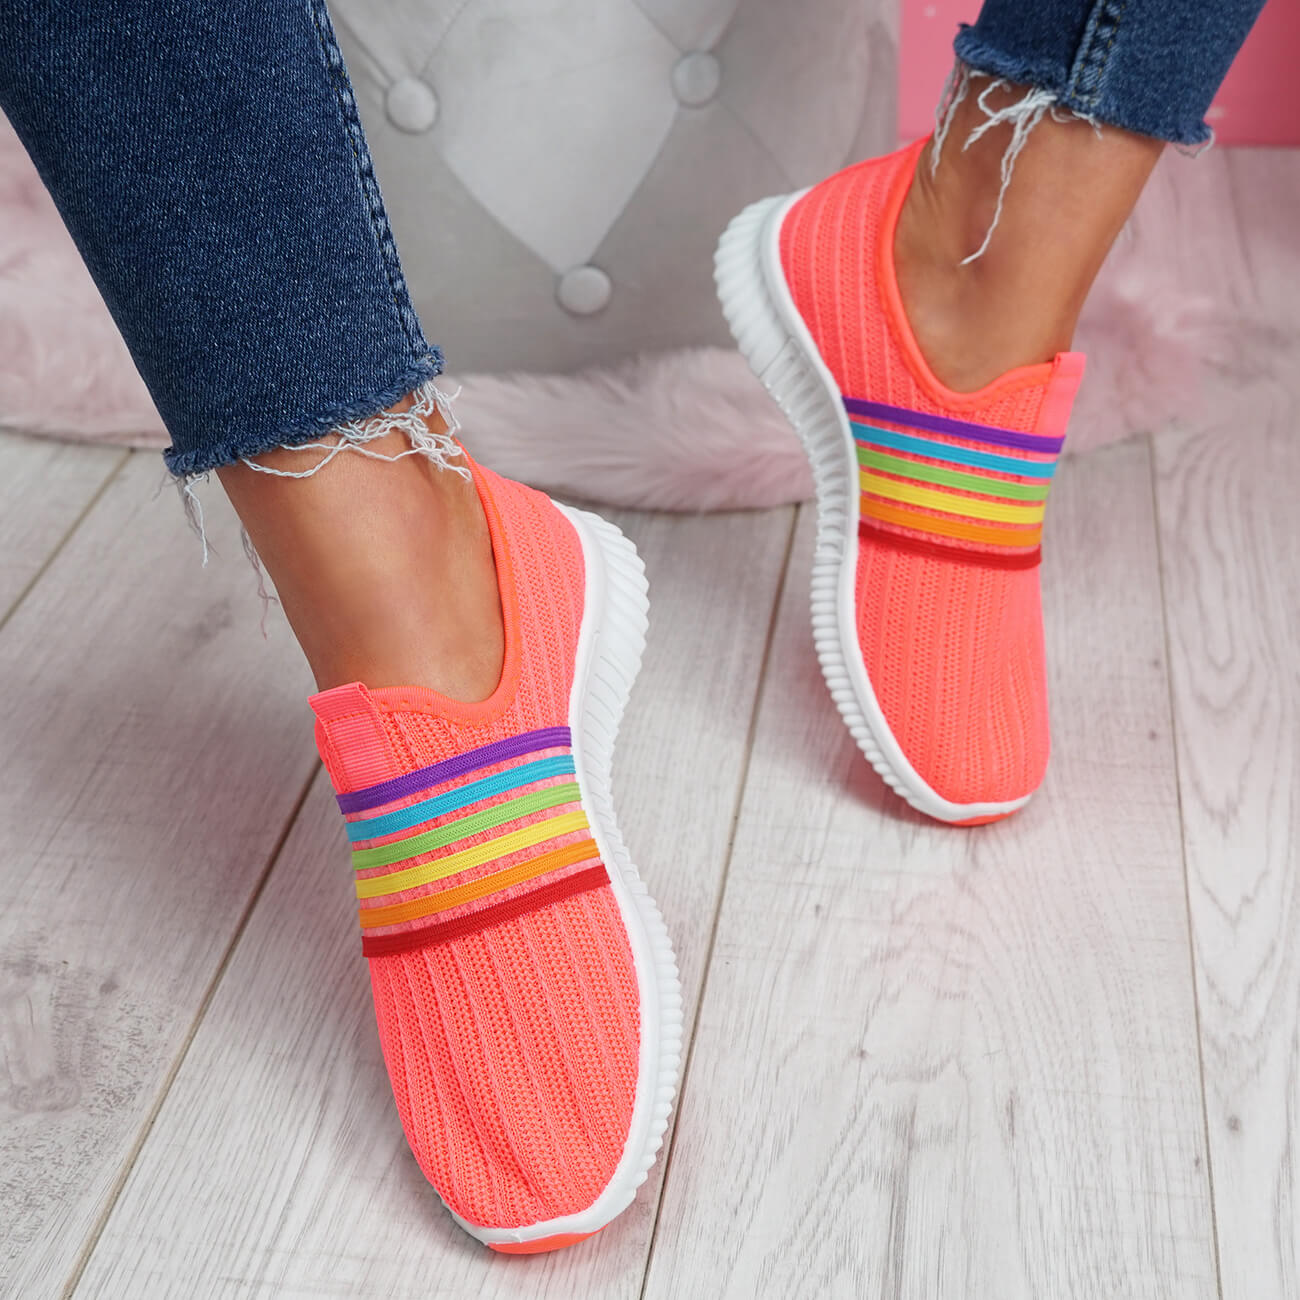 WOMENS LADIES SLIP ON RAINBOW SIZE TRAINERS PARTY SHOES HEEL WOMEN KNIT